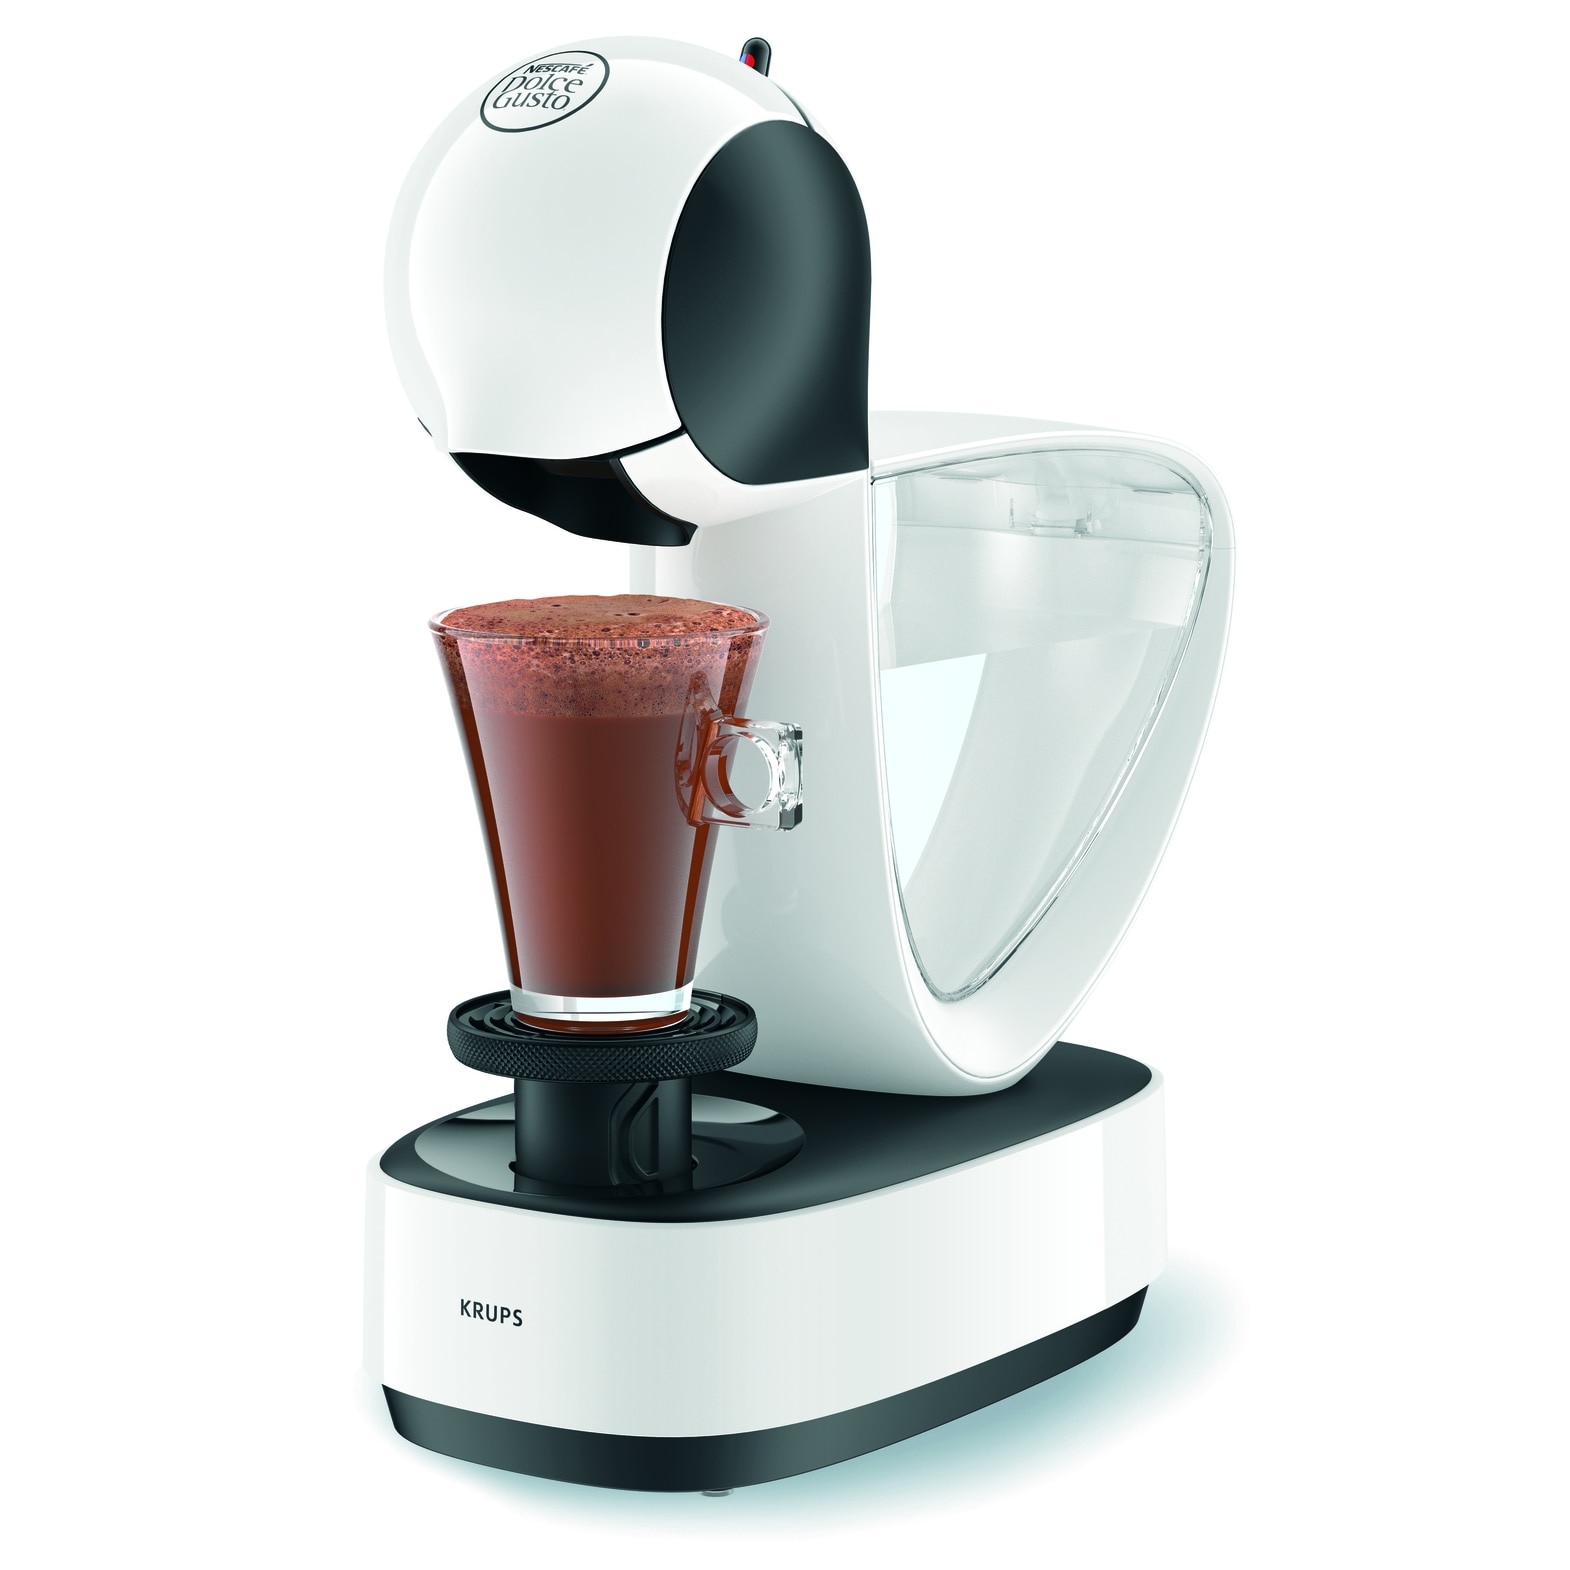 Dolce gusto krups infinissima. Кофемашина Dolce gusto Krups Infinissima. Капсульная кофемашина Krups Infinissima. Капсульная кофемашина Dolce gusto Krups Infinissima. Dolce gusto Infinissima.